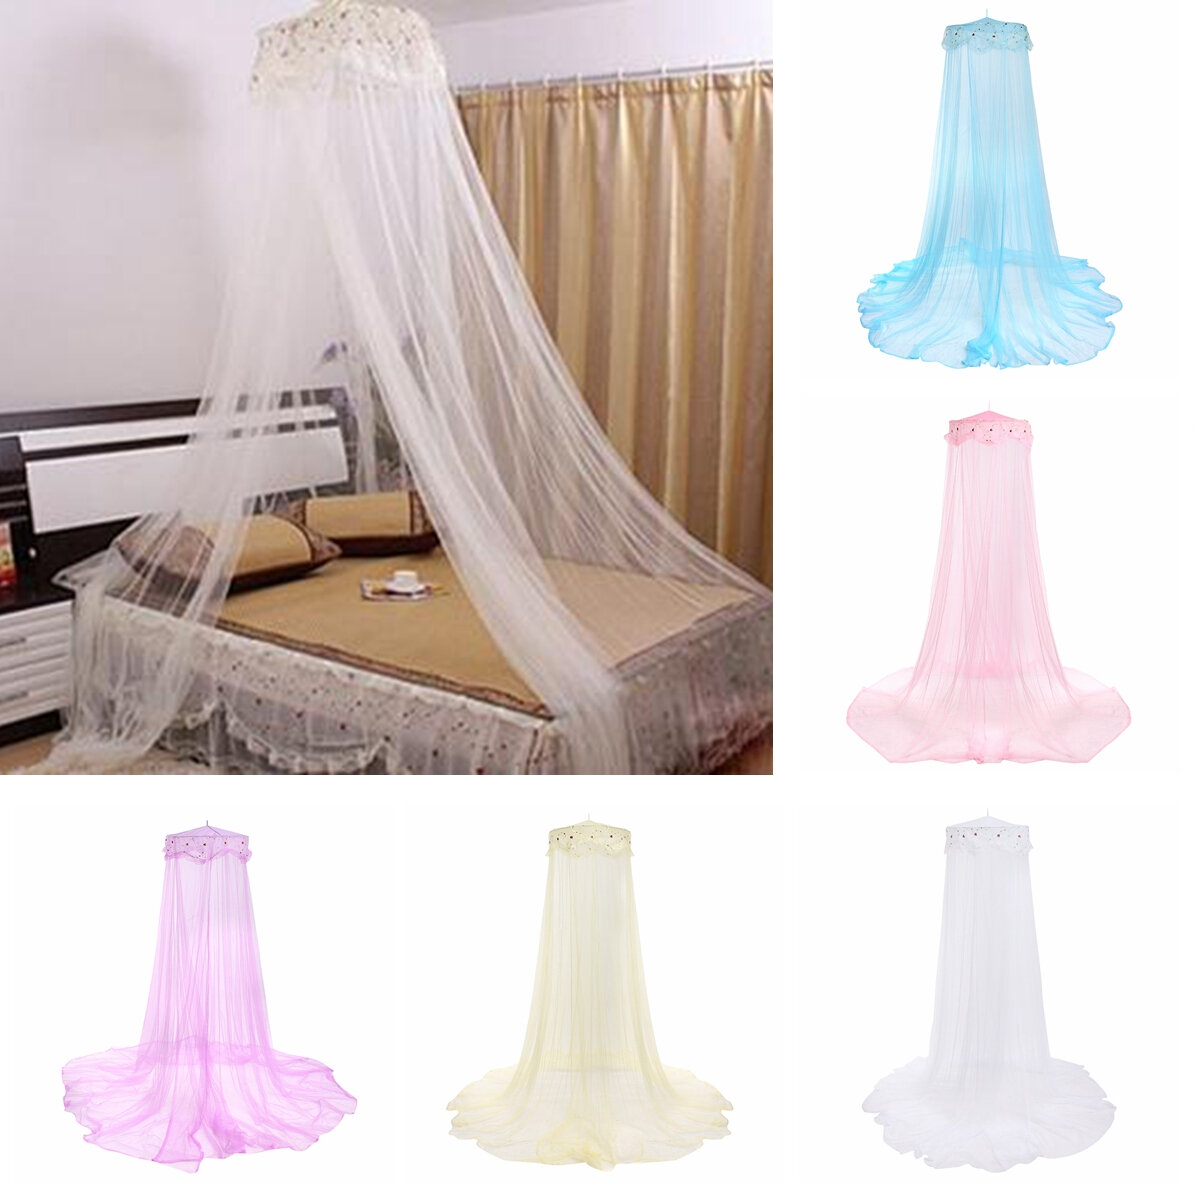 JETEVEN Canopy Mosquito Net Bed Queen Size Home Dome Foldable Bed Canopy Moquito Net